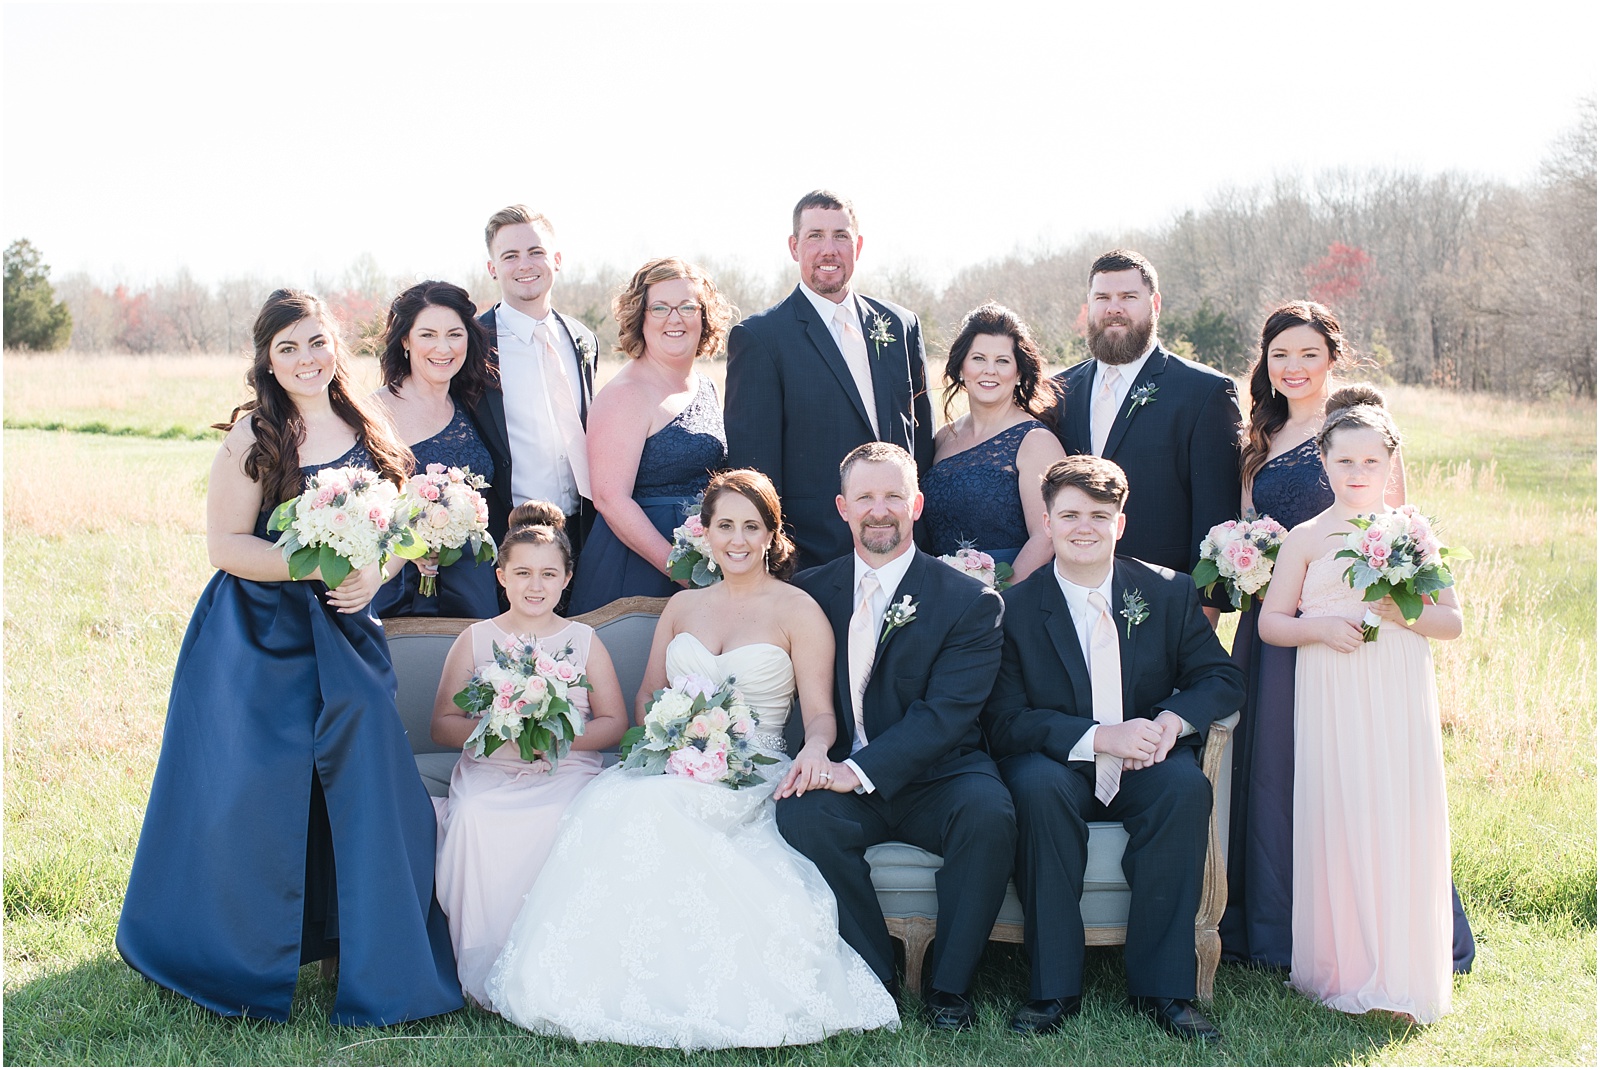 A Country Chic Starlight Meadows Wedding, Burlington NC, Outdoor wedding, blush wedding bouquet, vintage couch, gray vintage couch, bridal party photographs, bridal party, navy blue bridal party 